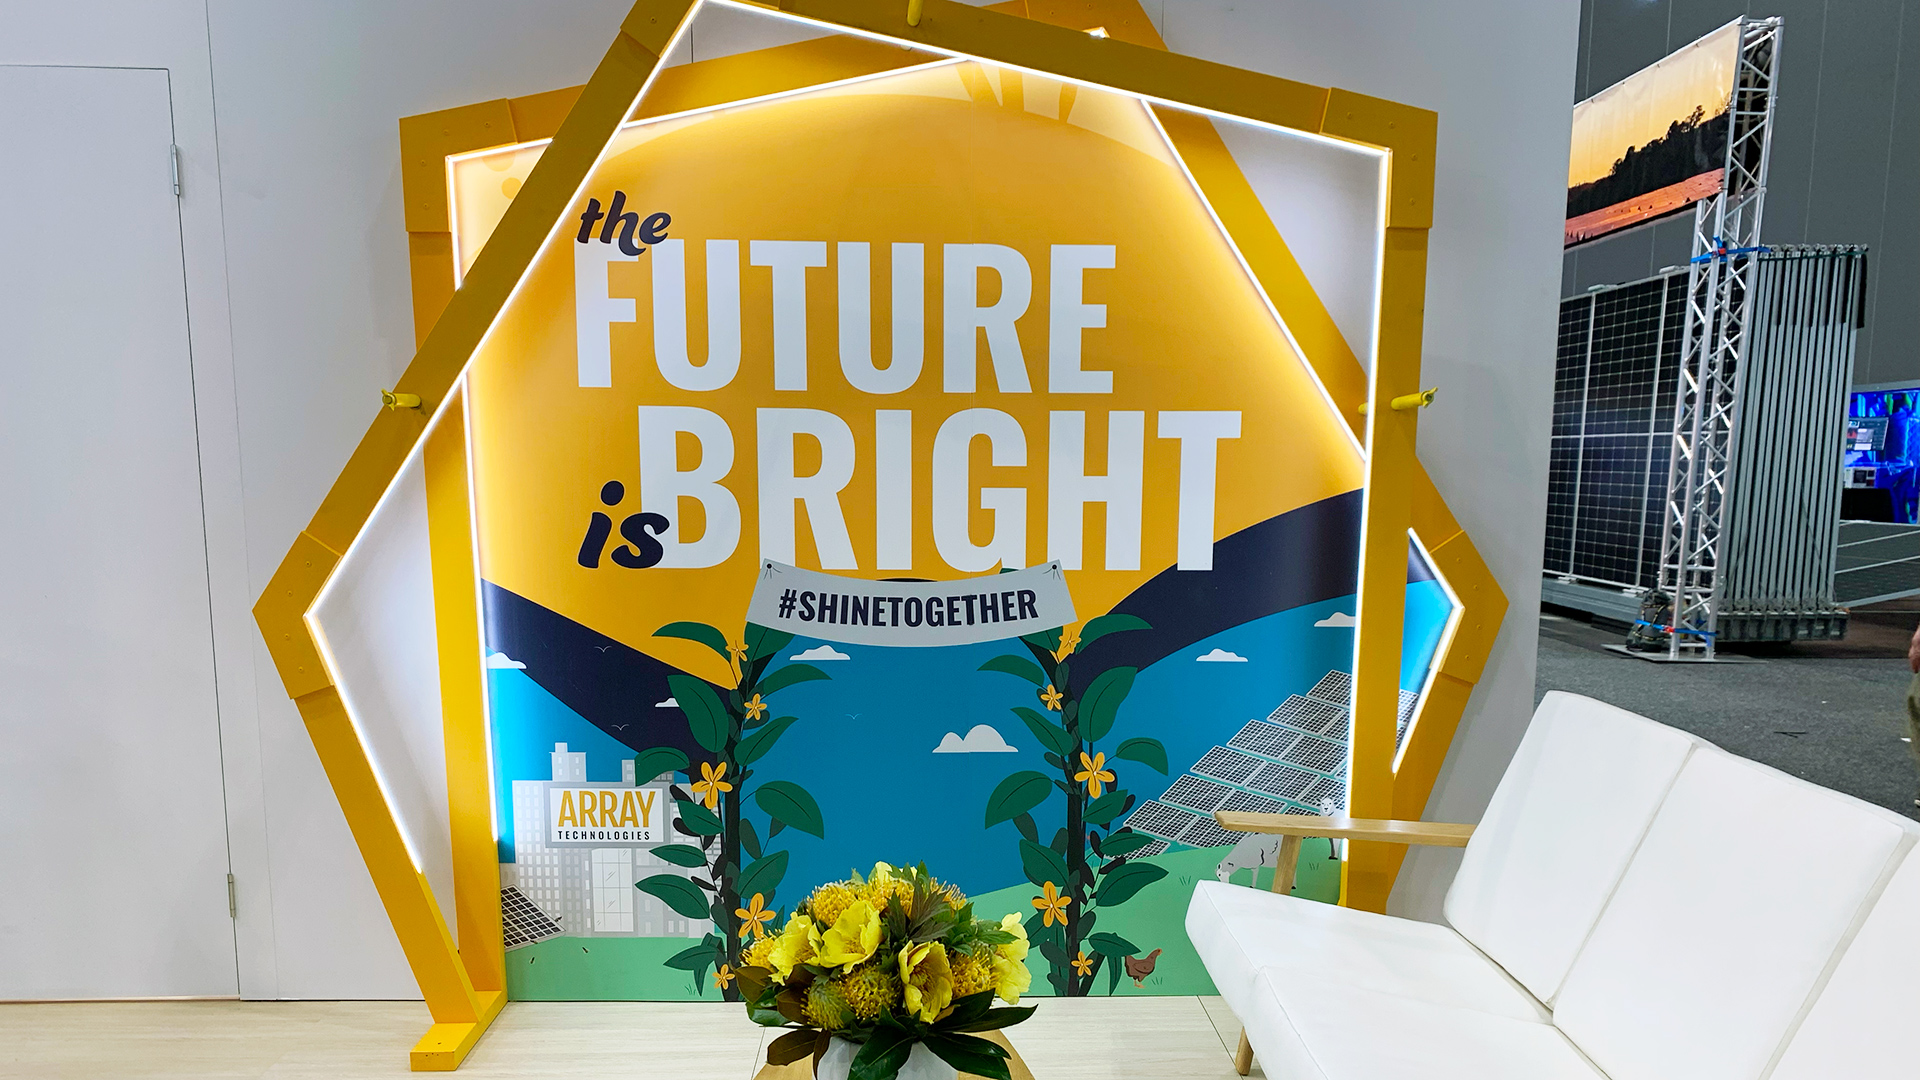 The Array Technologies trade show booth at All-Energy AU 2022 that reads "The future is bright. #ShineTogether"